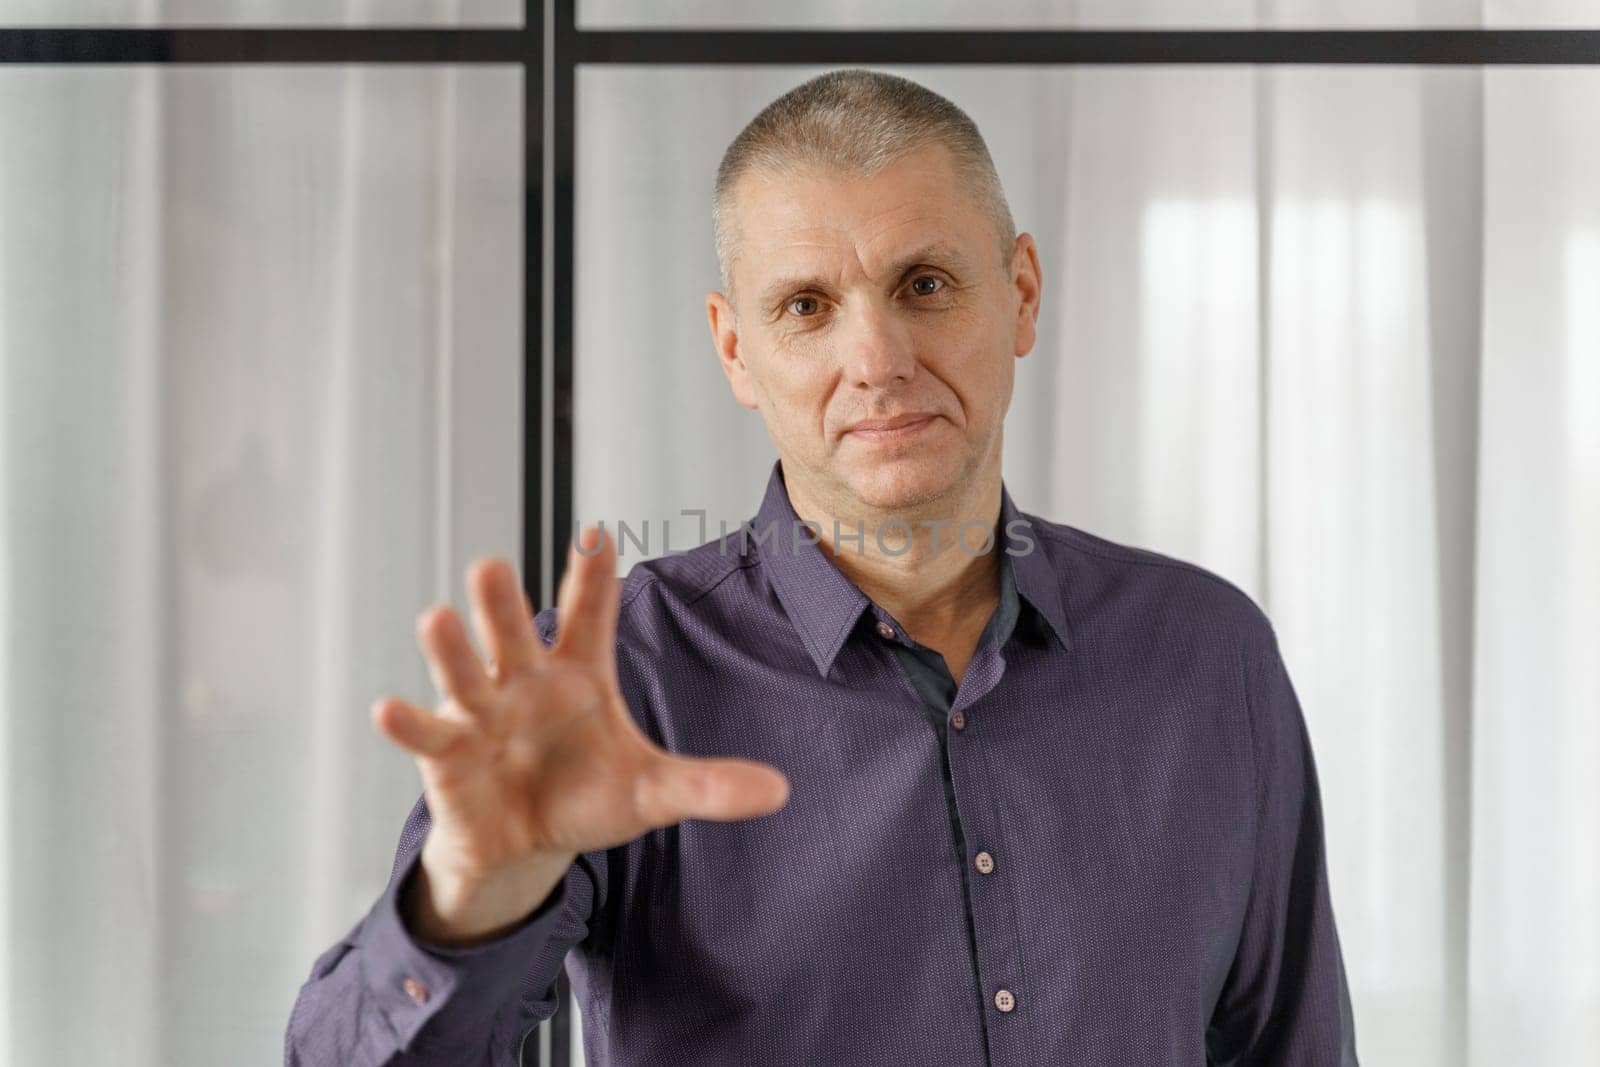 Portrait of a psychosomatic psychologist making a hand gesture to attract attention.